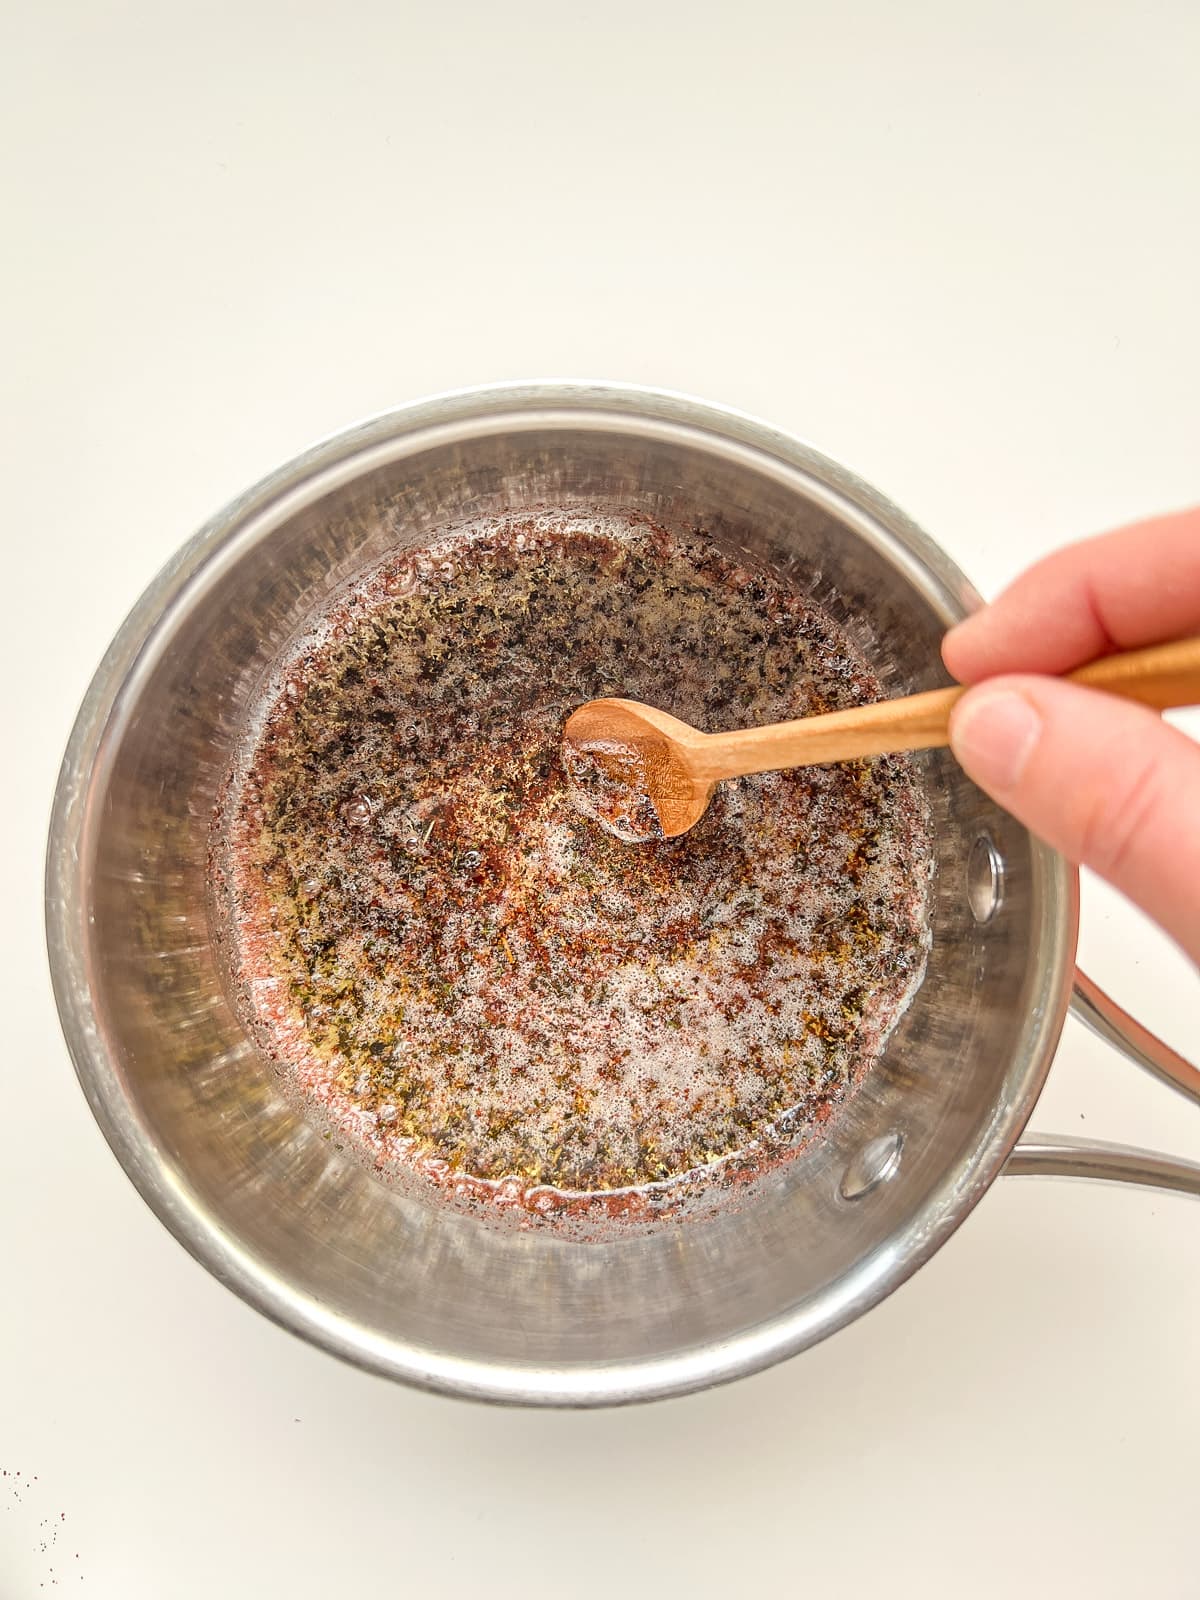 An image of a hand stirring a small wooden spoon that sits in a small stainless steel pot filled with herbed butter.